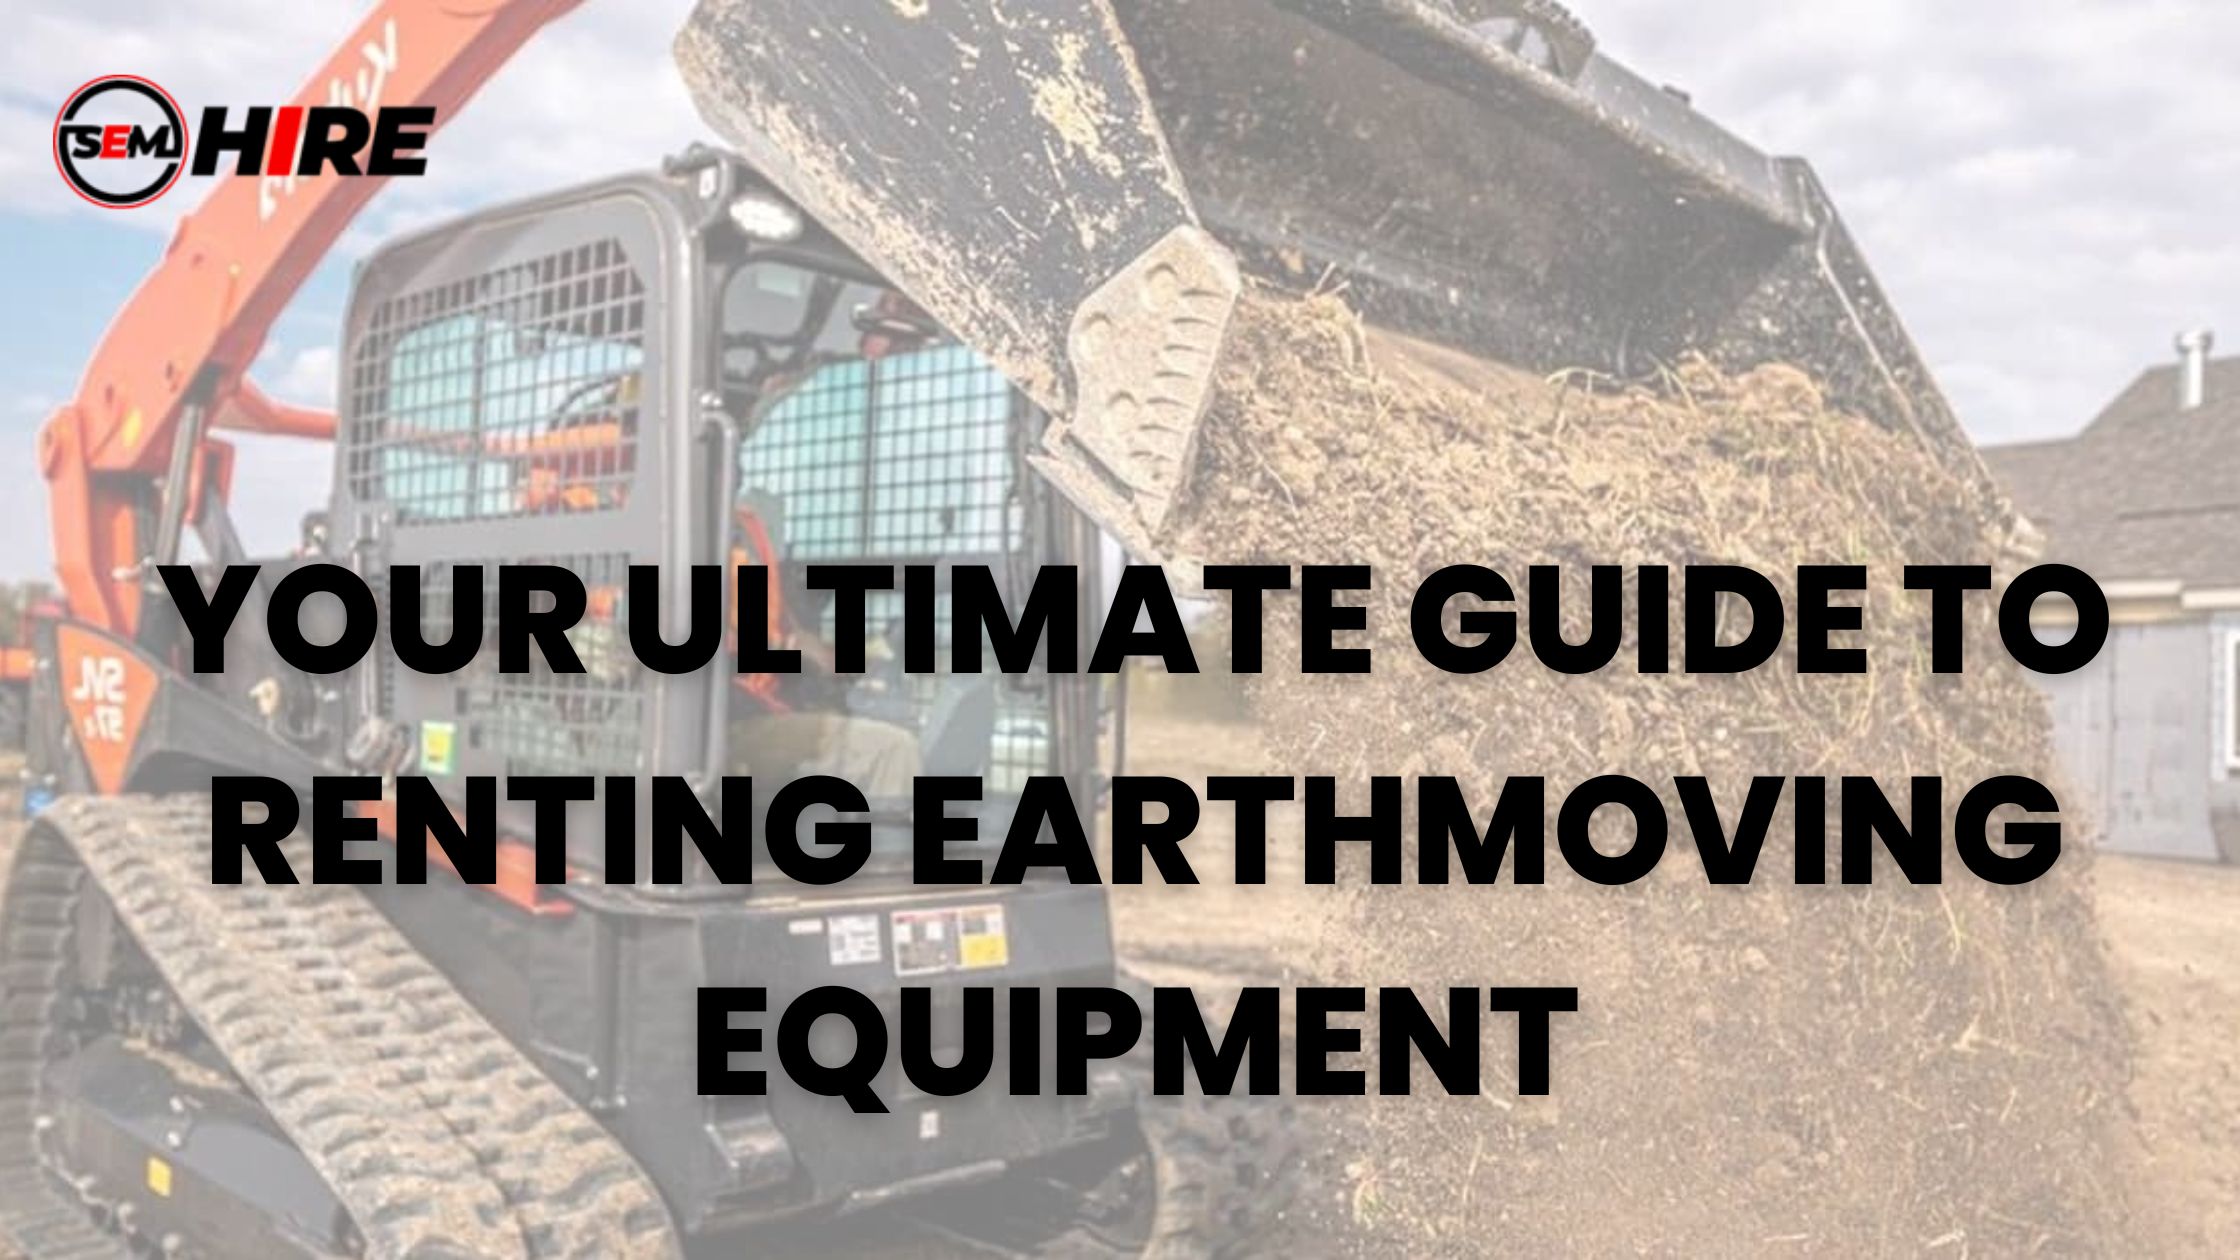 Your Ultimate Guide to Renting Earthmoving Equipment